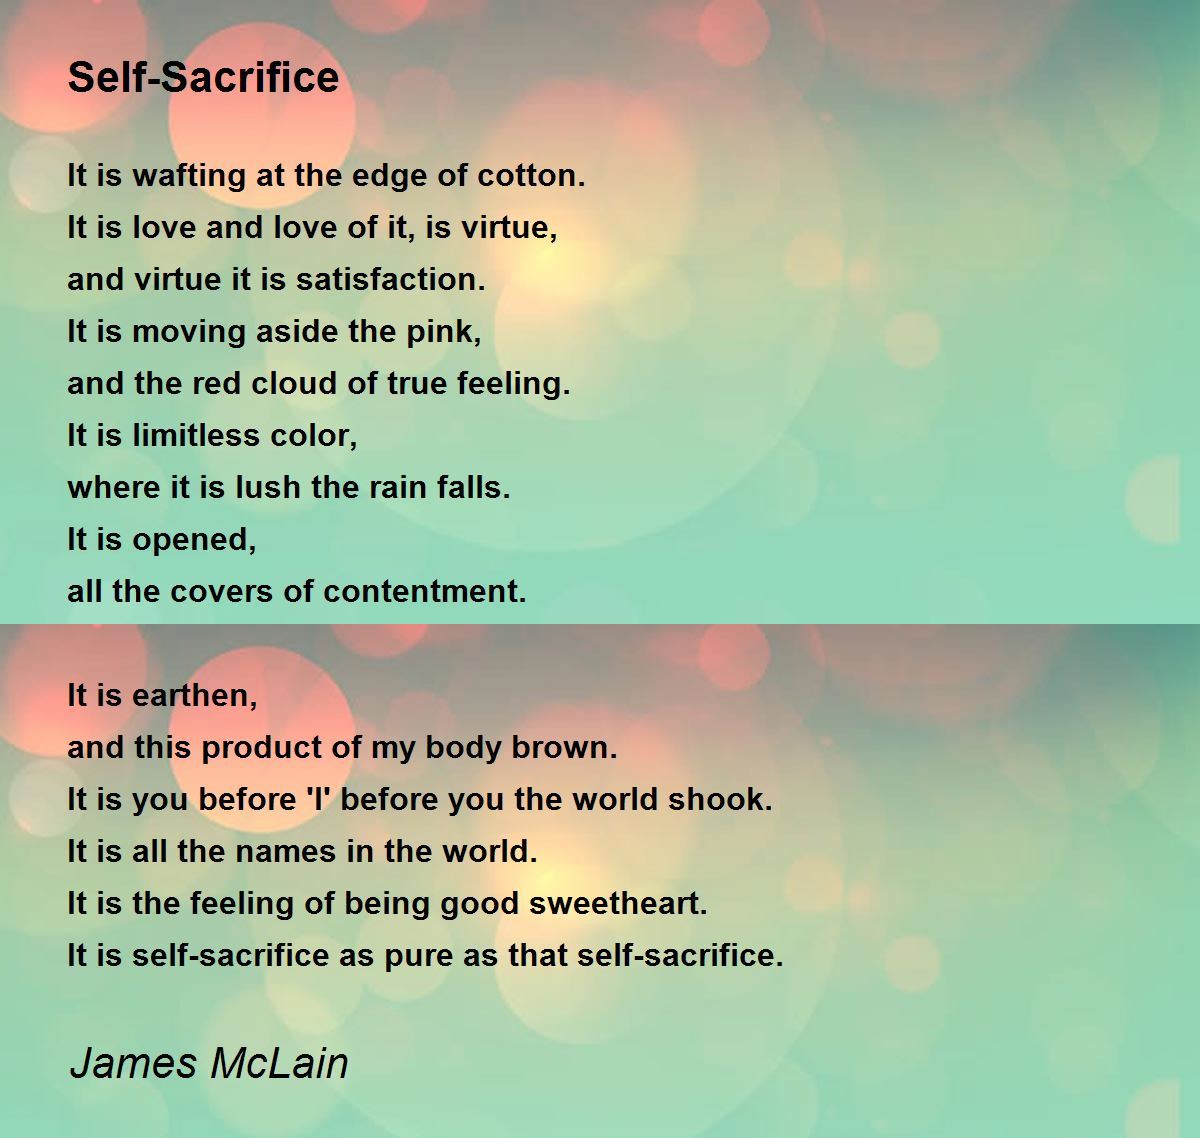 Self-Sacrifice In A Short Story